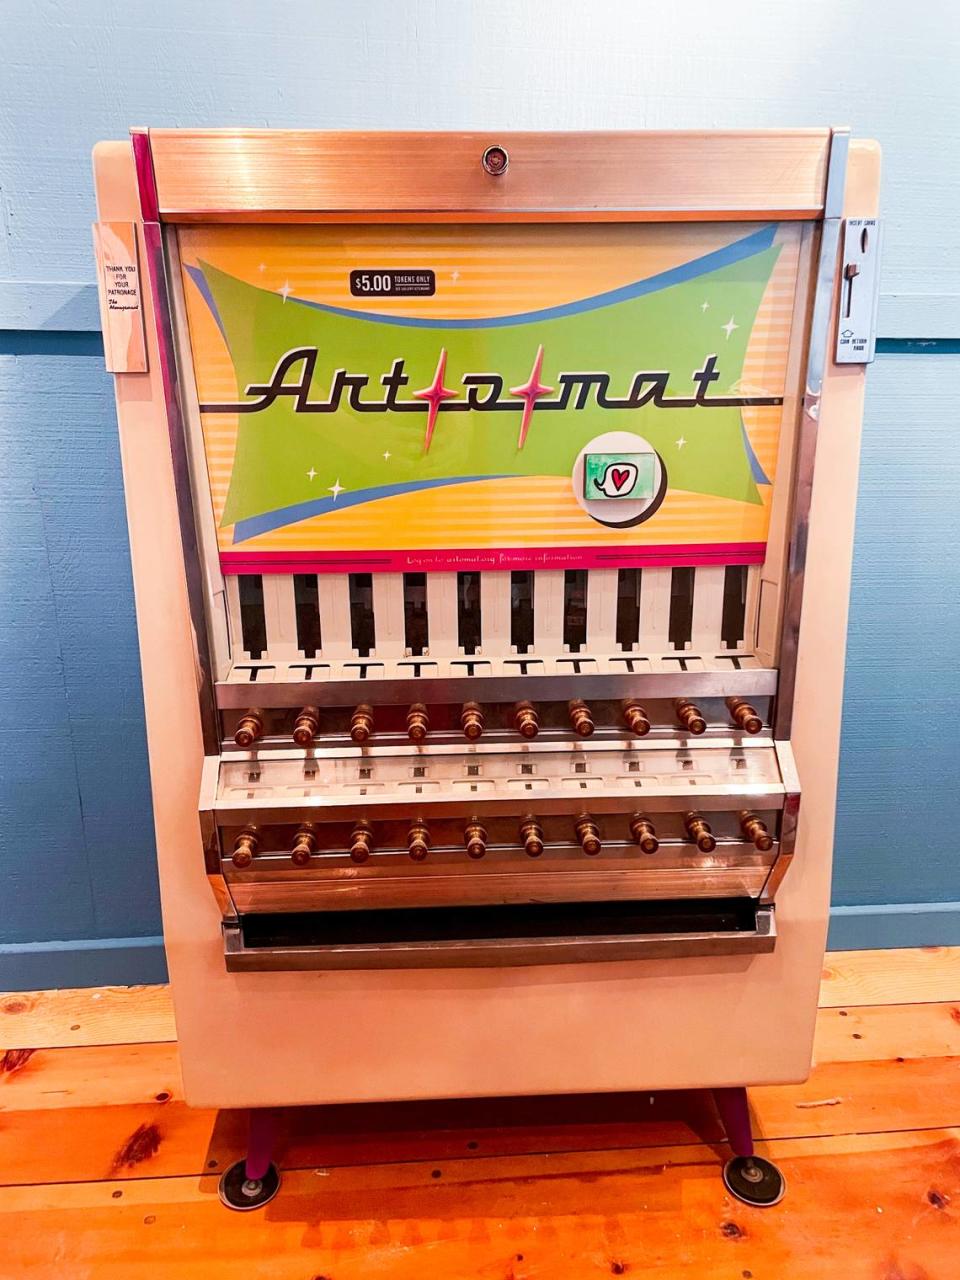 This revamped cigarette vending machine at The Love Story Project in Cambria dispenses tiny works of art rather than smokes or candy.